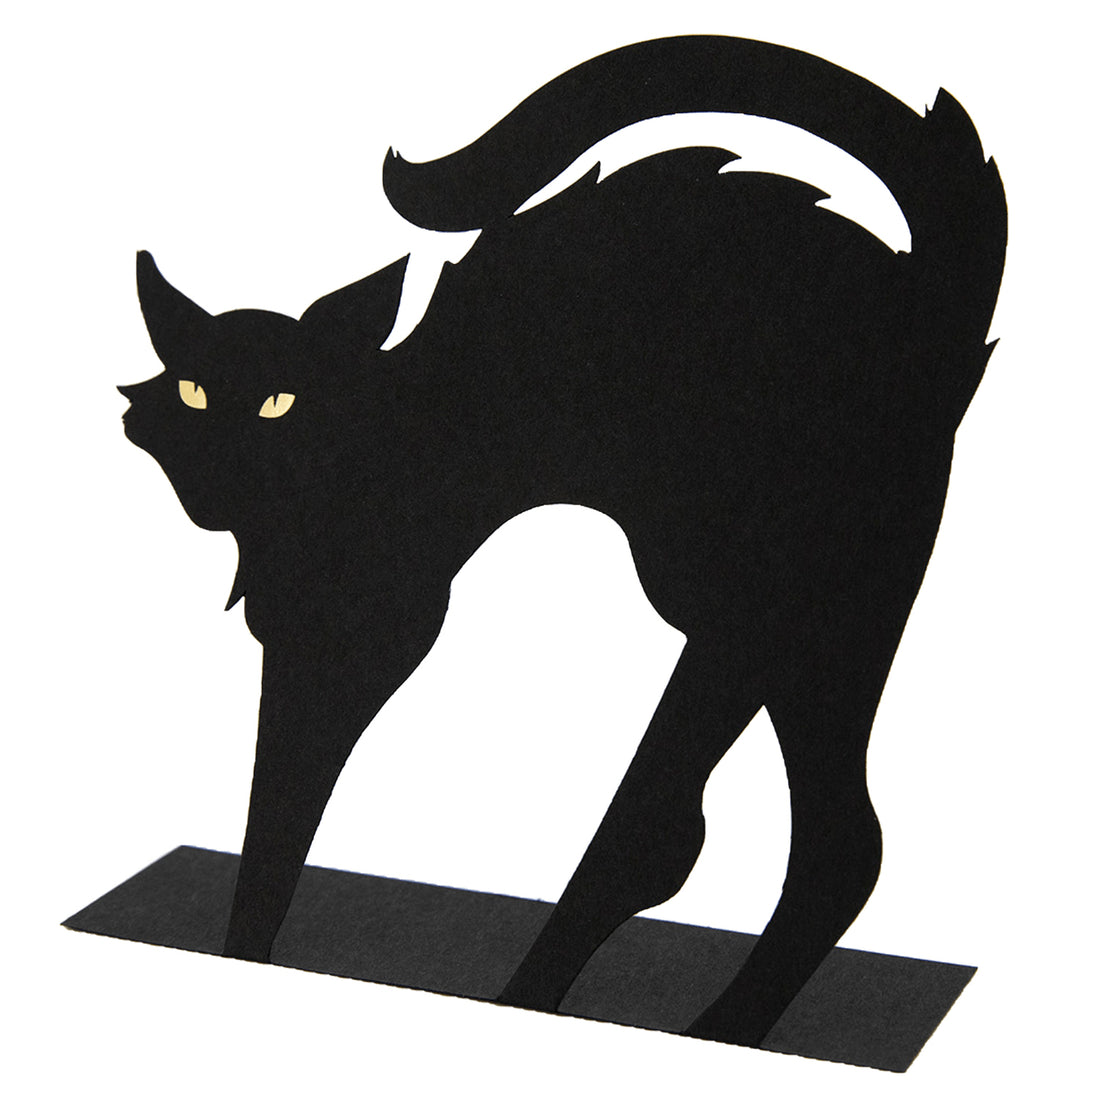 A black, die-cut, free-standing place card in the shape of an arched black cat, featuring fold foil eyes.